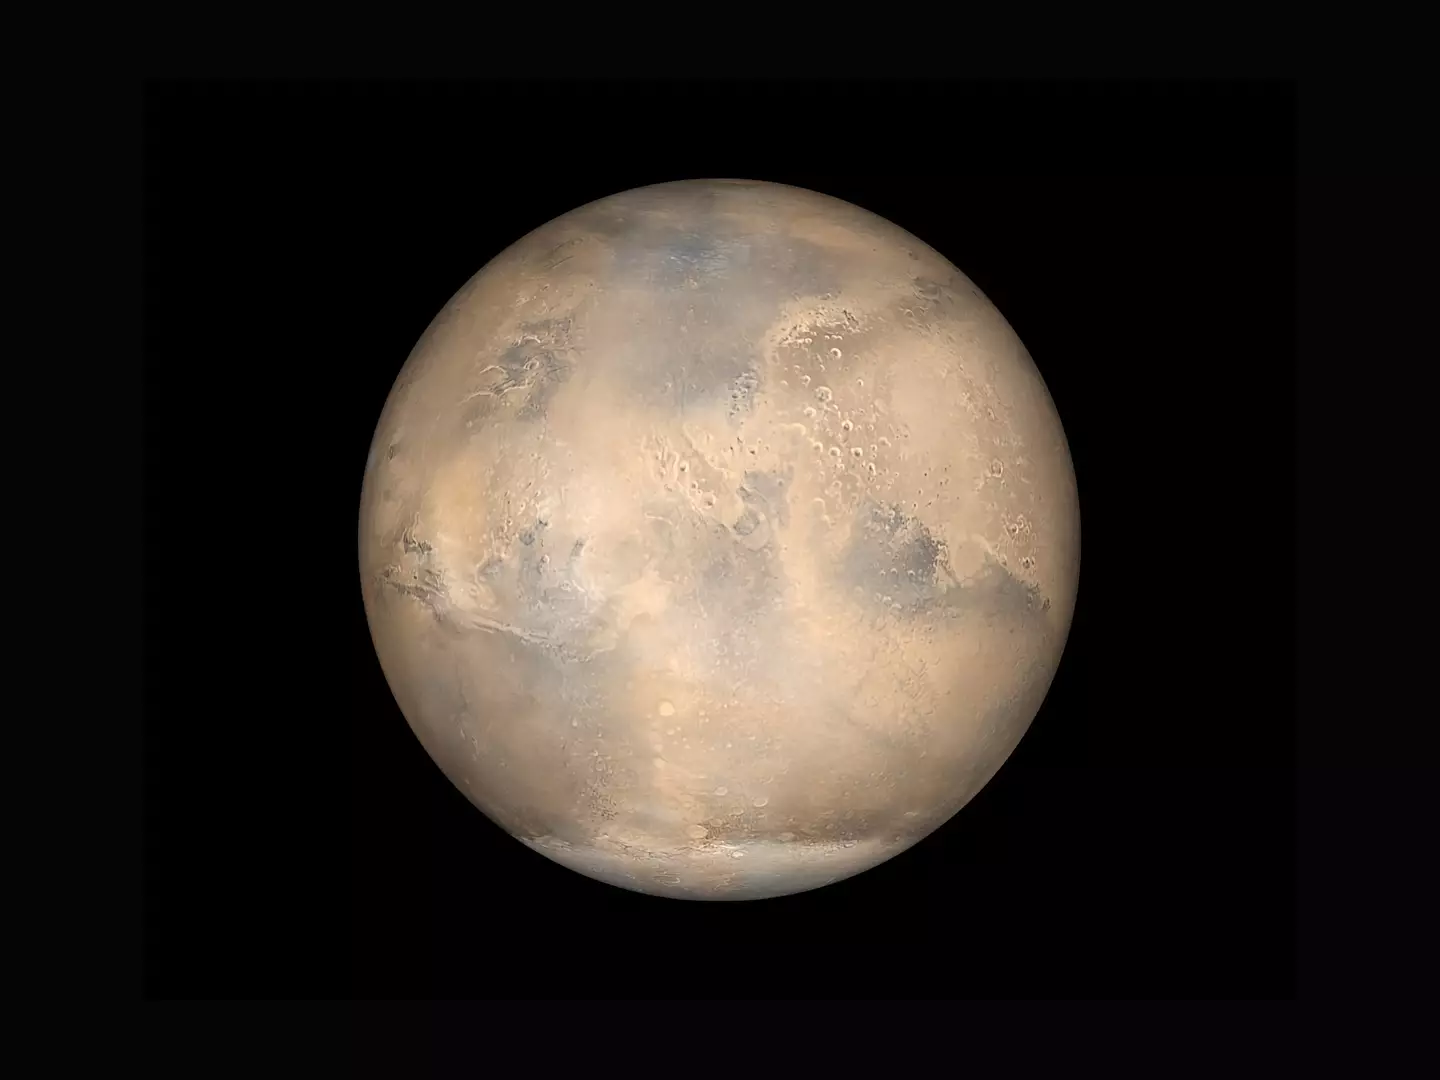 Mars is spinning faster and scientists are not sure about the reason why.